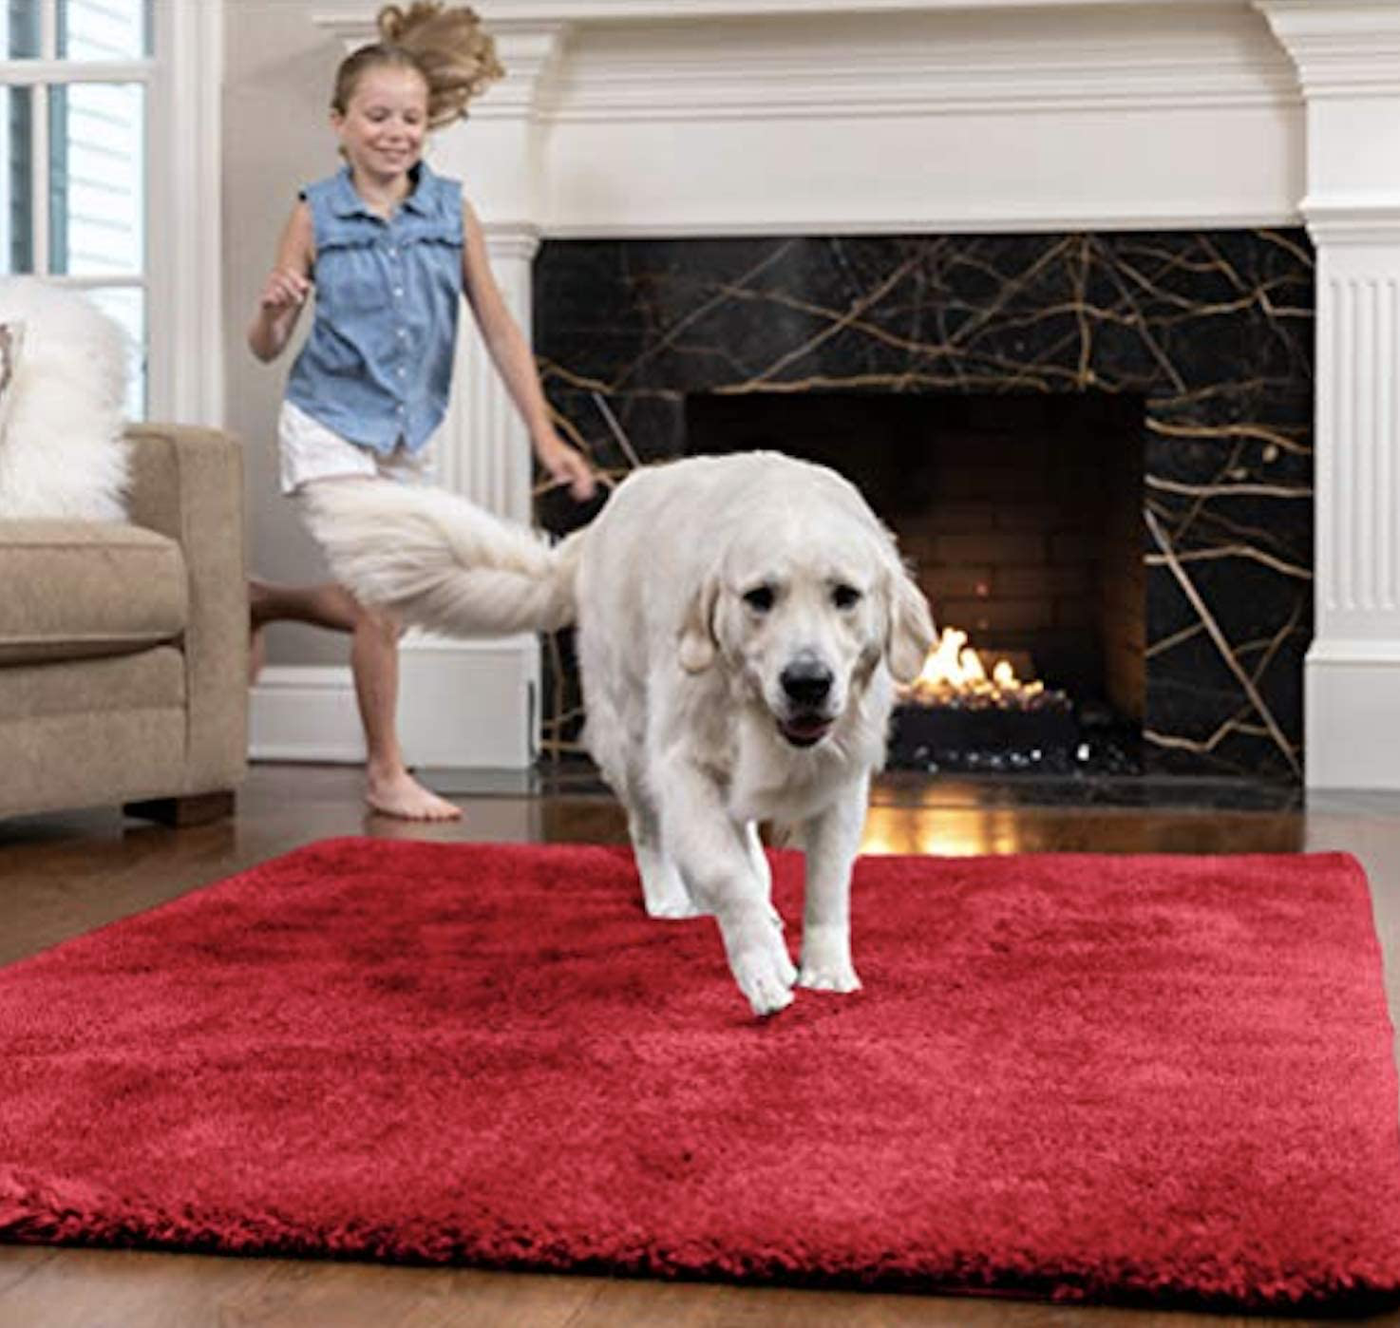 Gorilla Grip Original Ultra Soft Area Rug, 4x6 FT, Many Colors, Luxury Shag Carpets, Fluffy Indoor Washable Rugs for Kids Bedrooms, Plush Home Decor for Living Room Floor, Nursery, Bedroom, Red